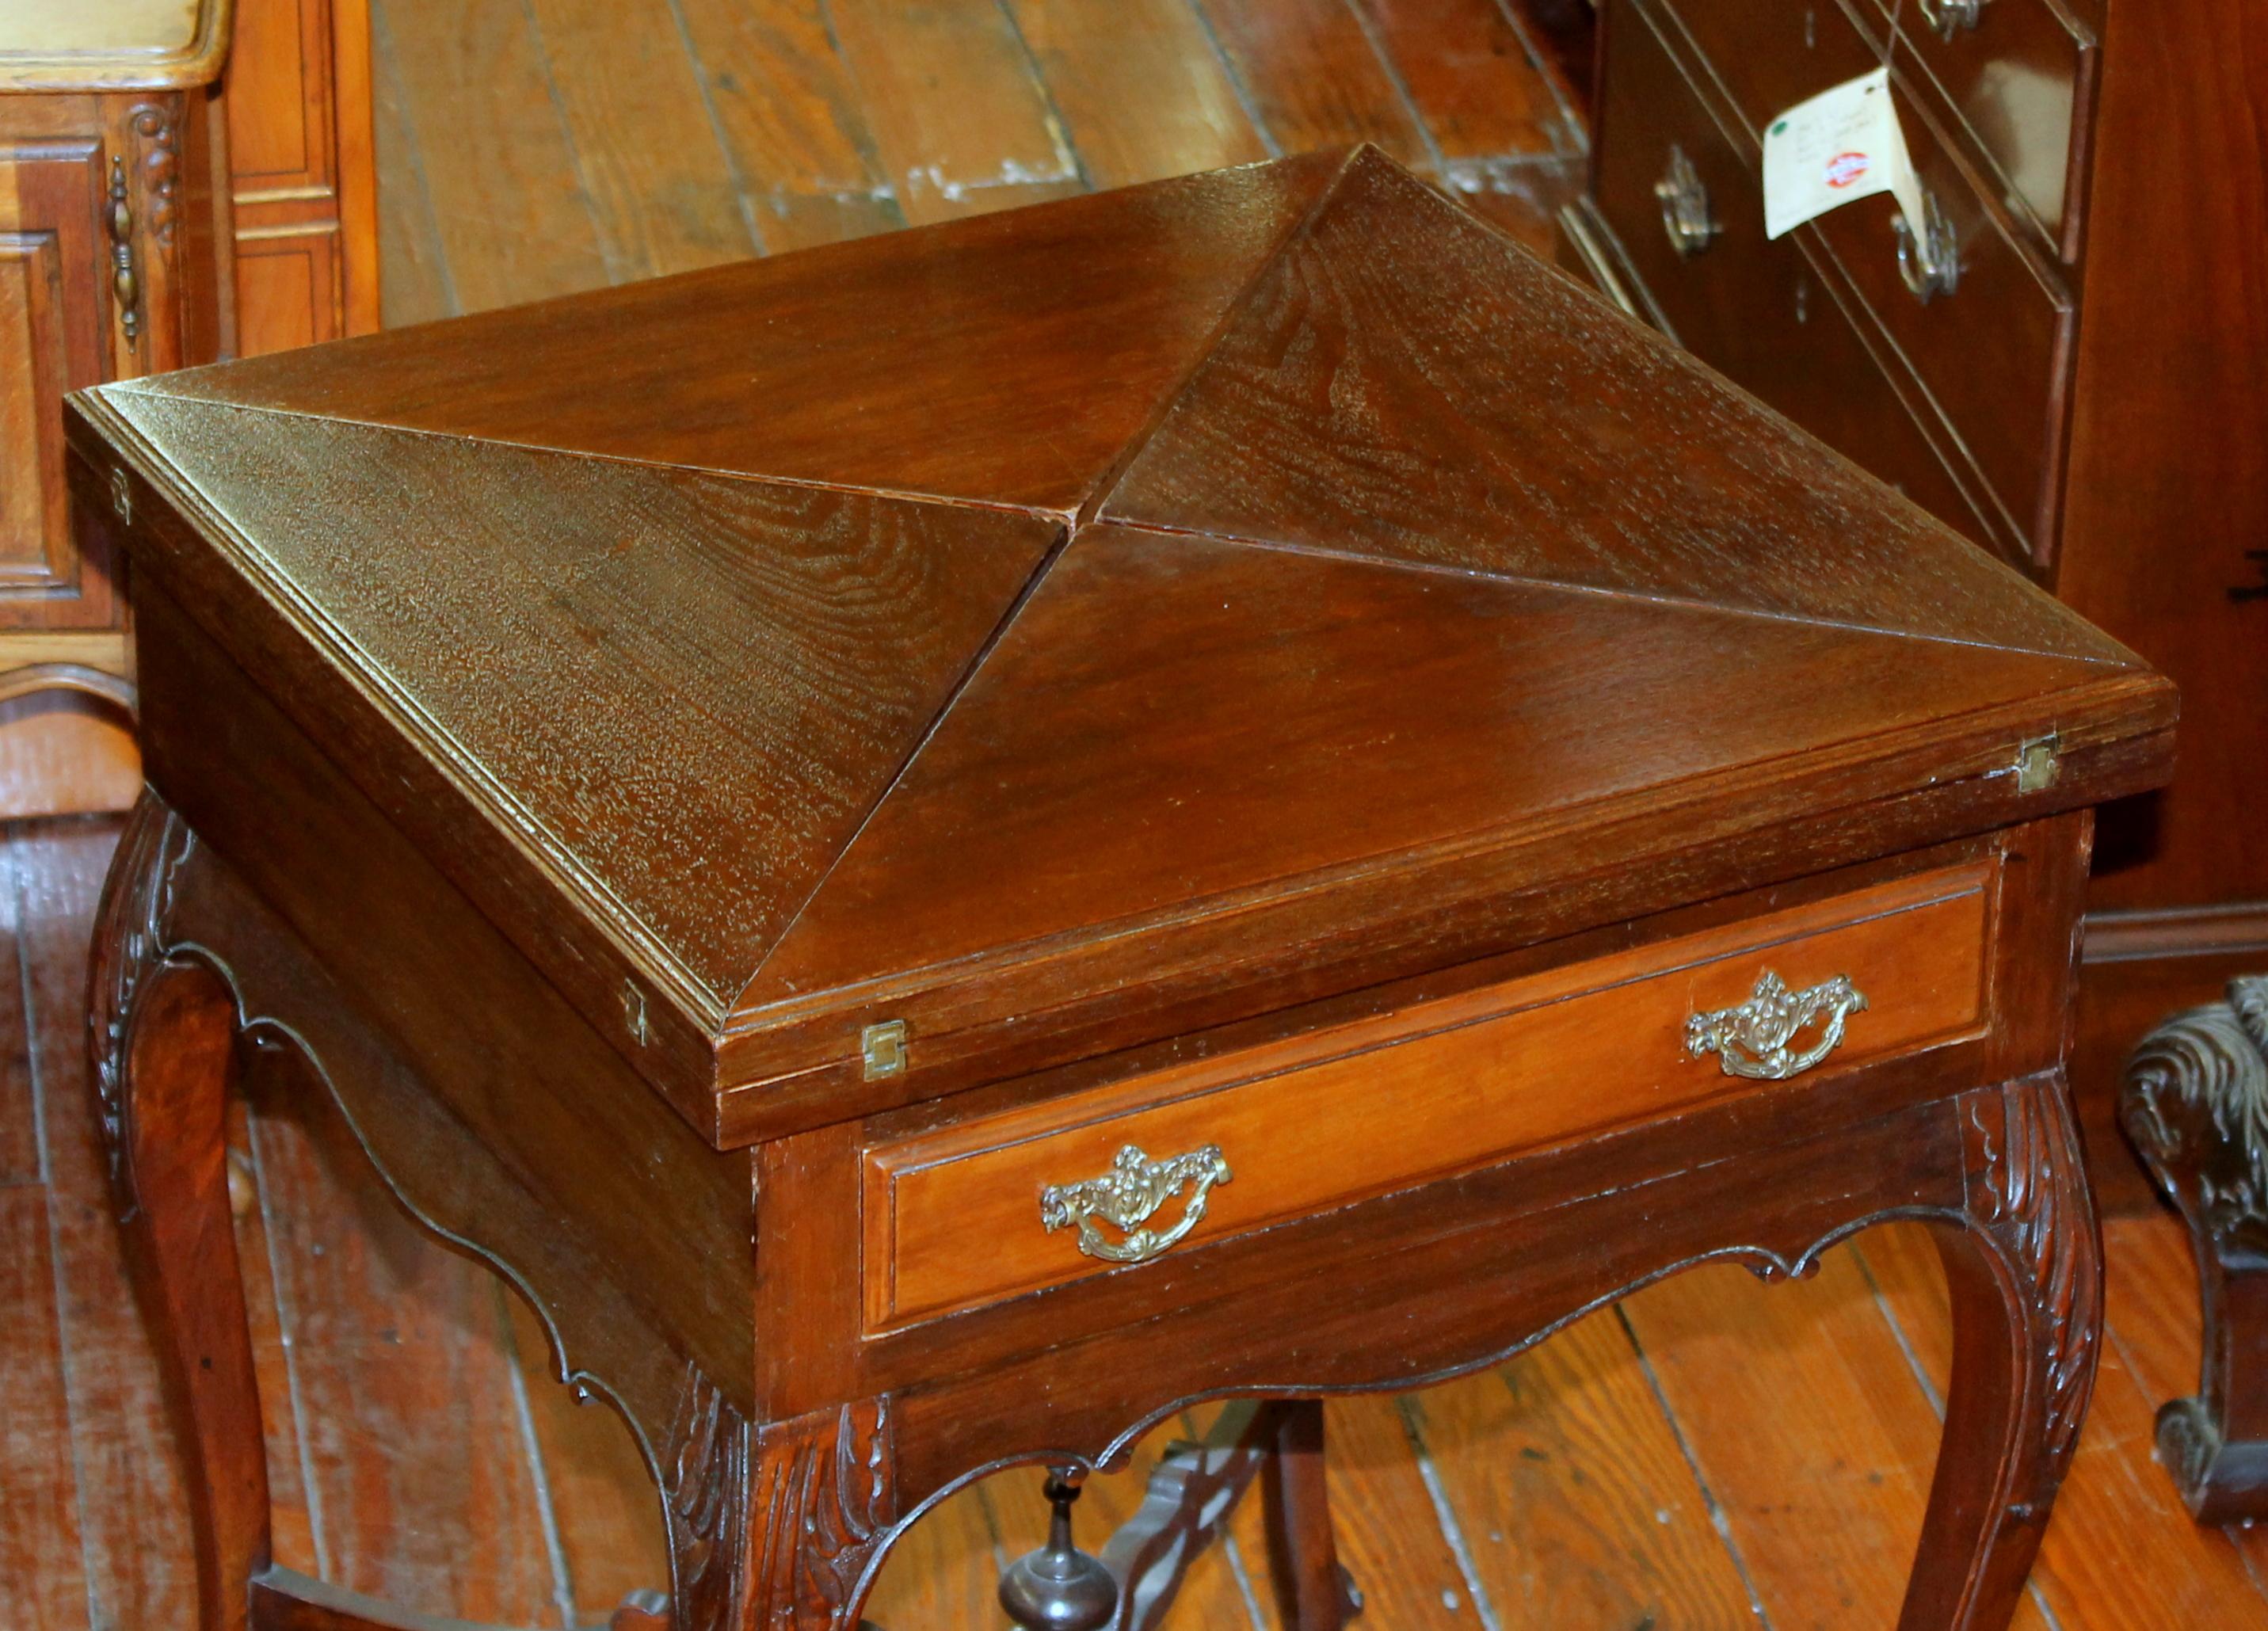 Fine quality antique English hand carved walnut French style envelope folding games table with tooled leather surface; original brass handles and casters. Please note finely carved attributes as well as the pierced stretcher beneath. (As you turn